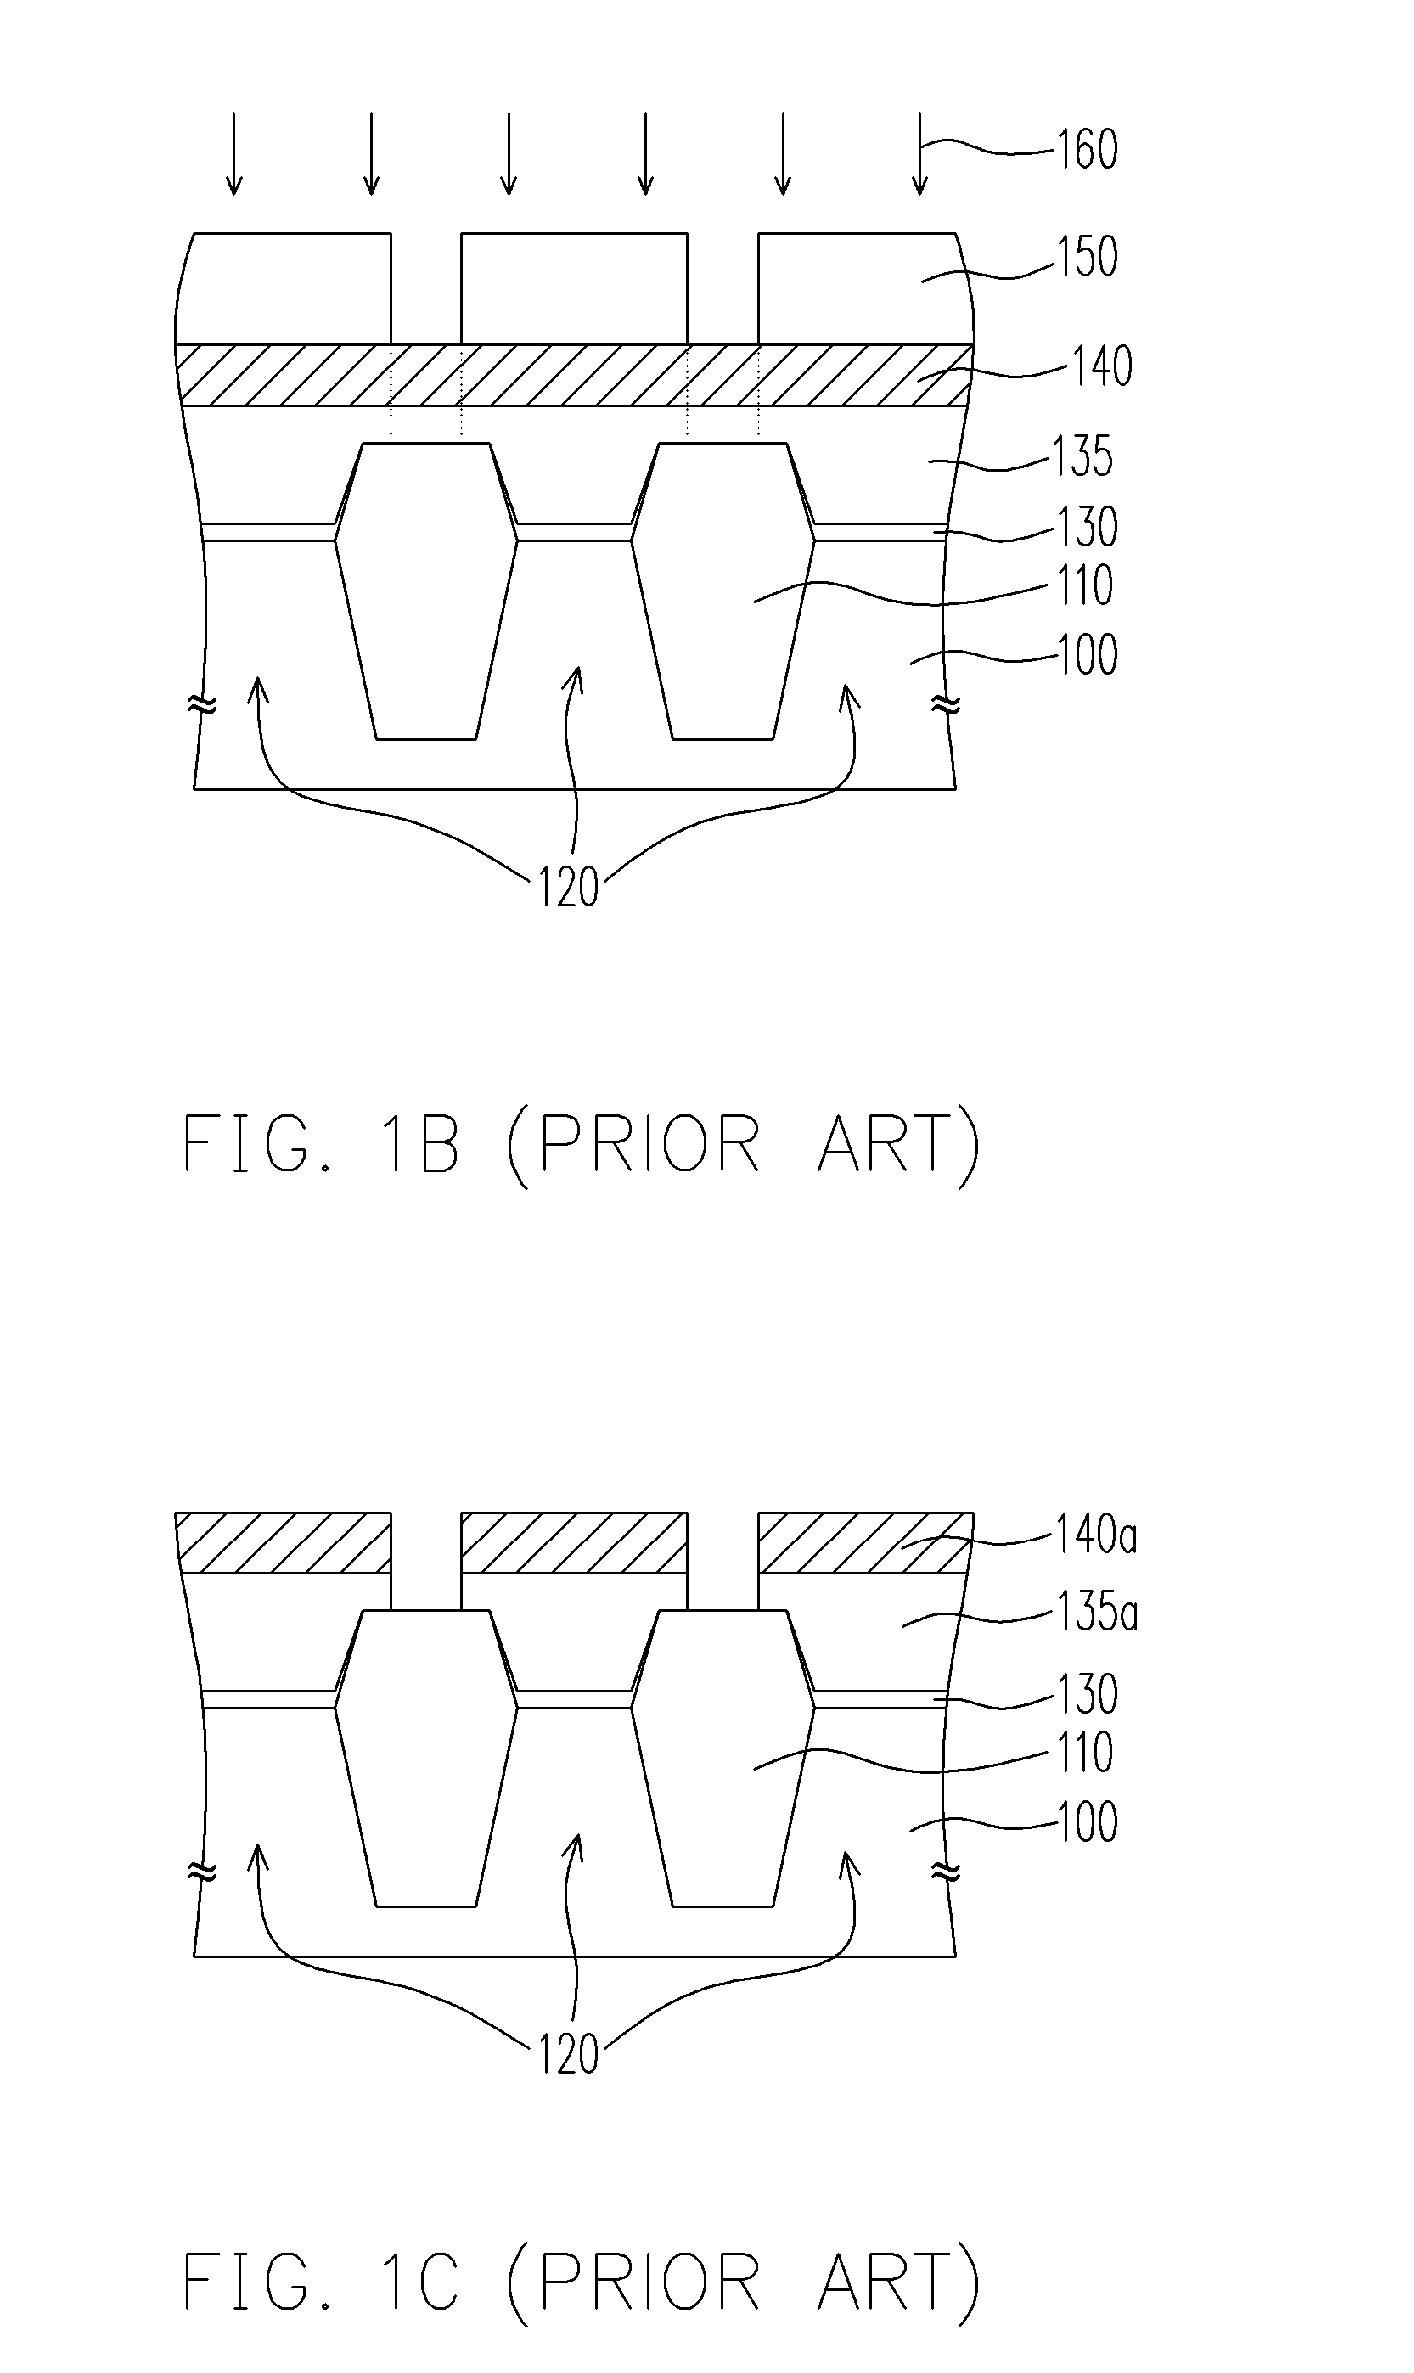 Structure containing self-aligned conductive lines and fabricating method thereof